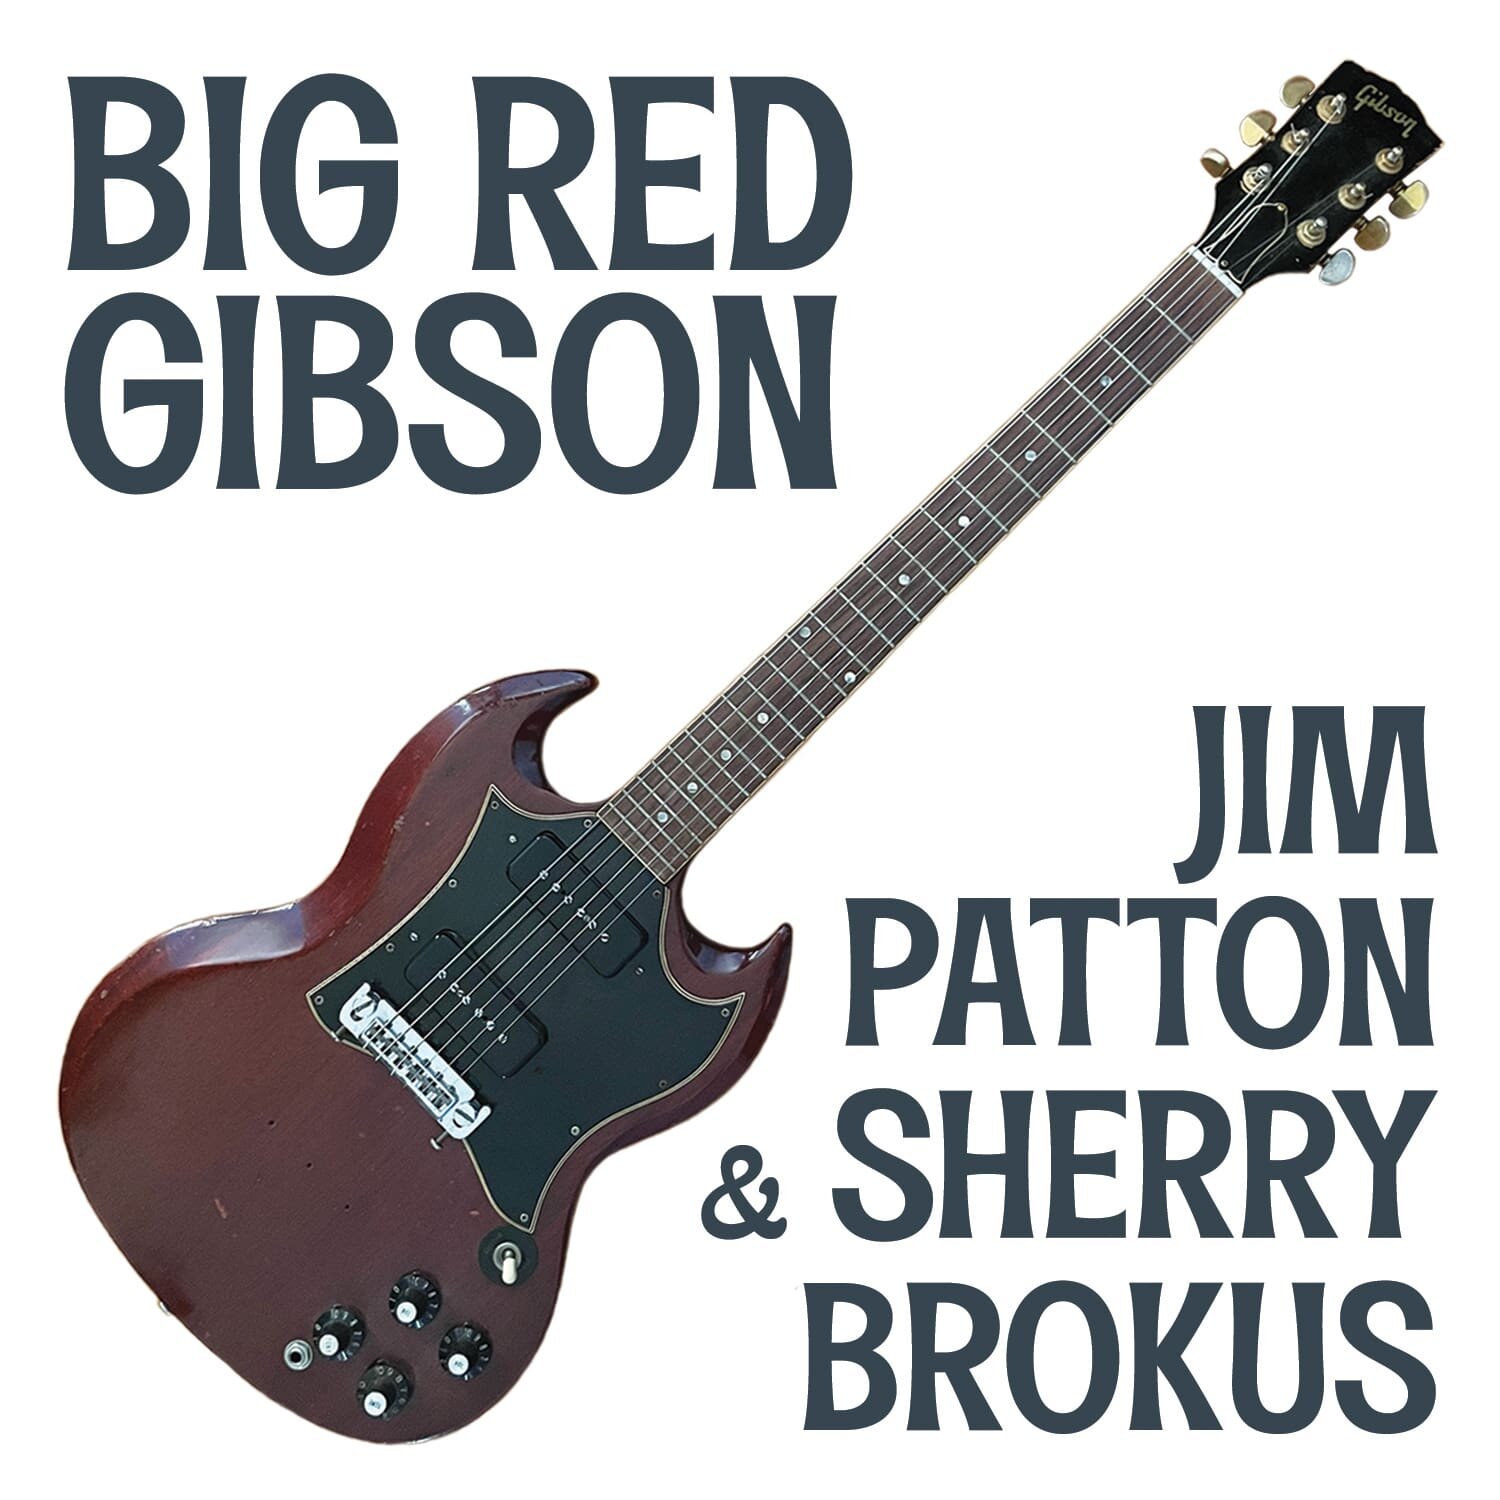 Severna Park natives Jim Patton and Sherry Brokus are promoting their "Big Red Gibson" album, which features a Tom Petty and The Byrds influence.